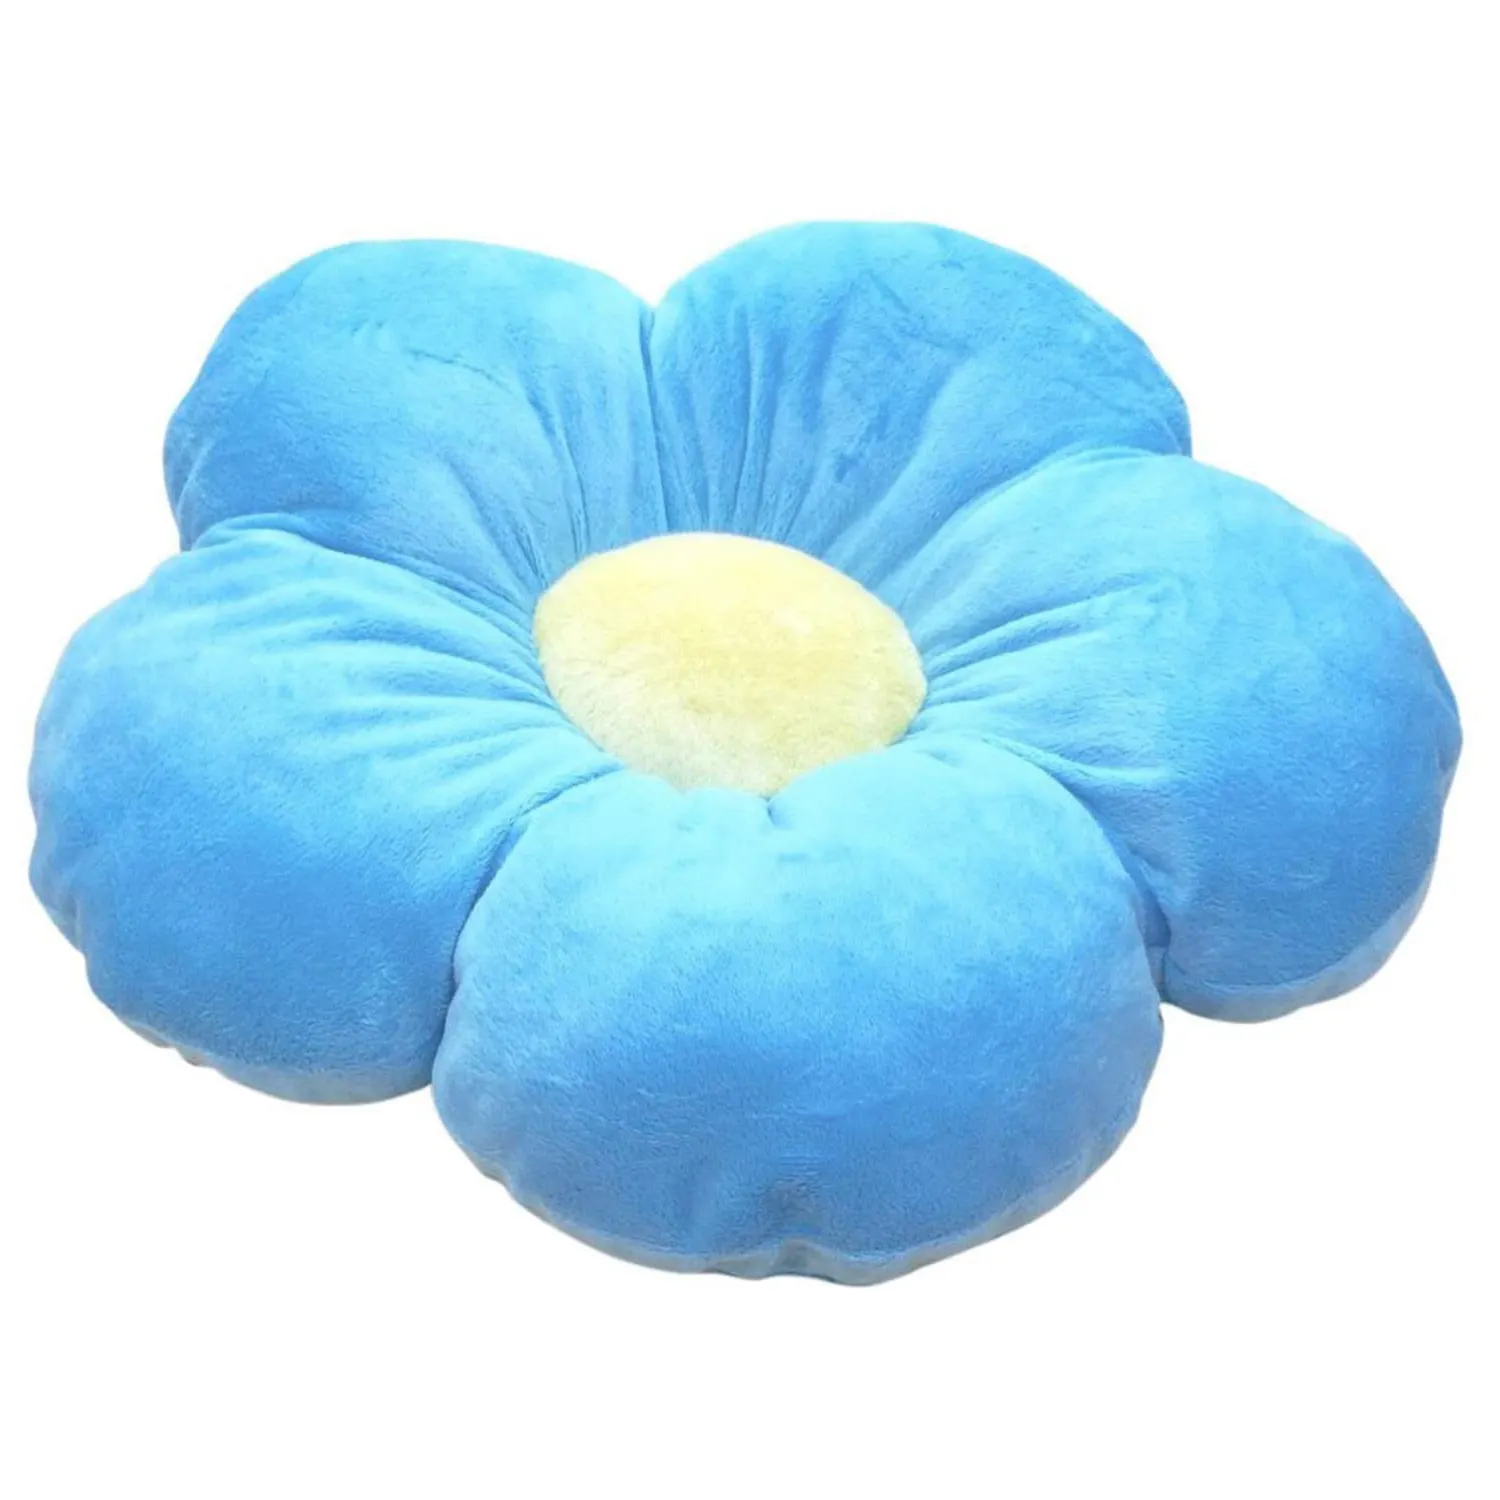 Flower Plush Pillow Thick Kids Soft Seating Floor Cushion Chair Sofa Pads For Girls Room Baby Nursery Toy Home Bedroom